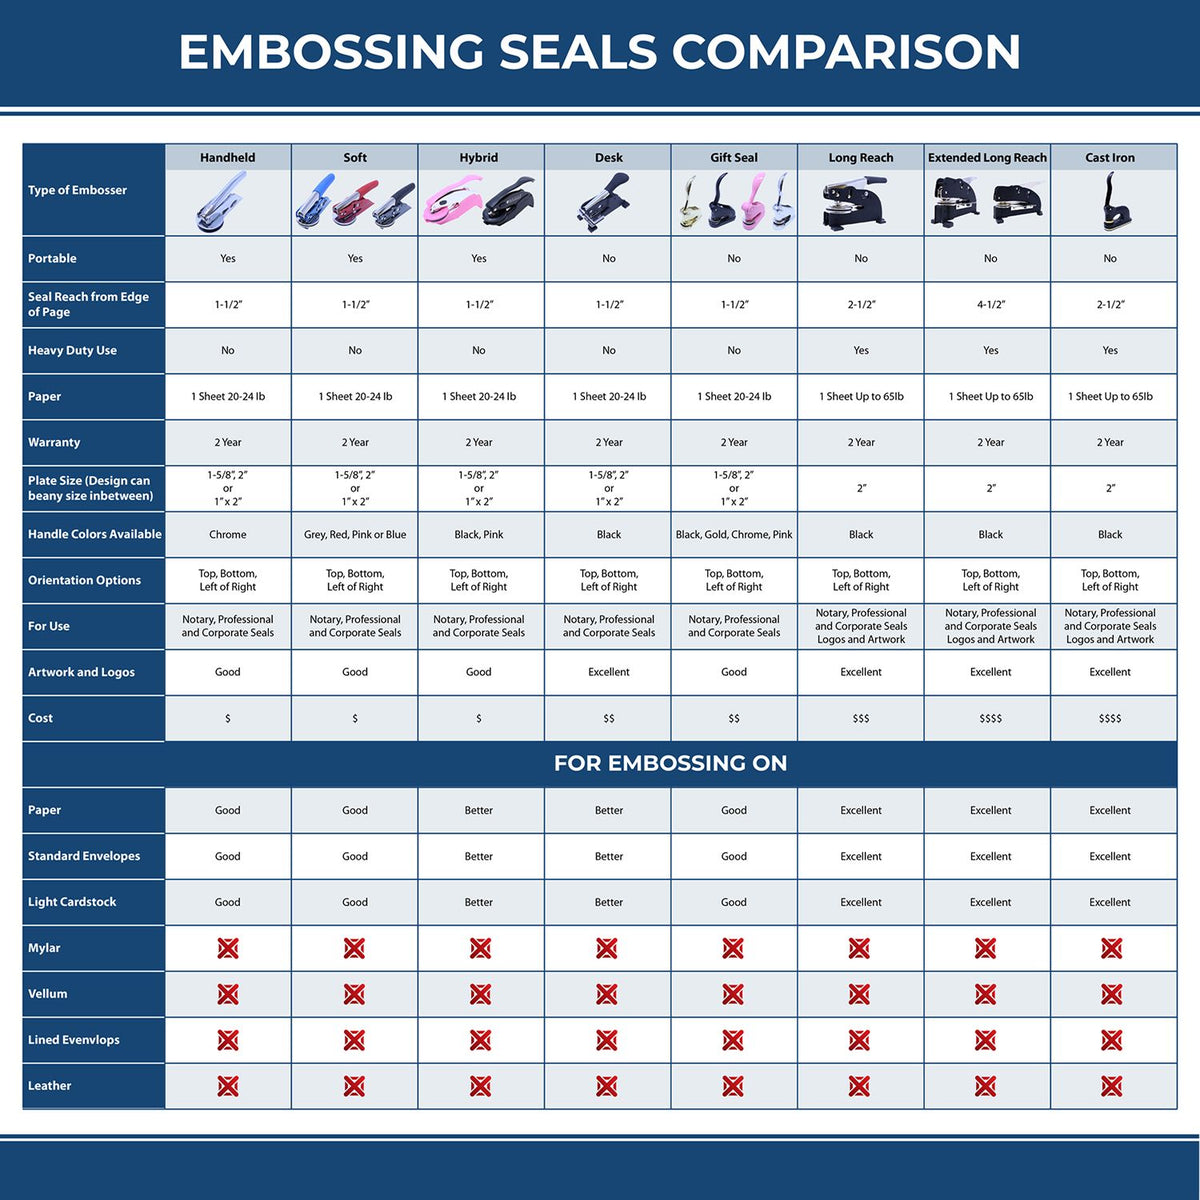 A comparison chart for the different types of mount models available for the State of Colorado Extended Long Reach Geologist Seal